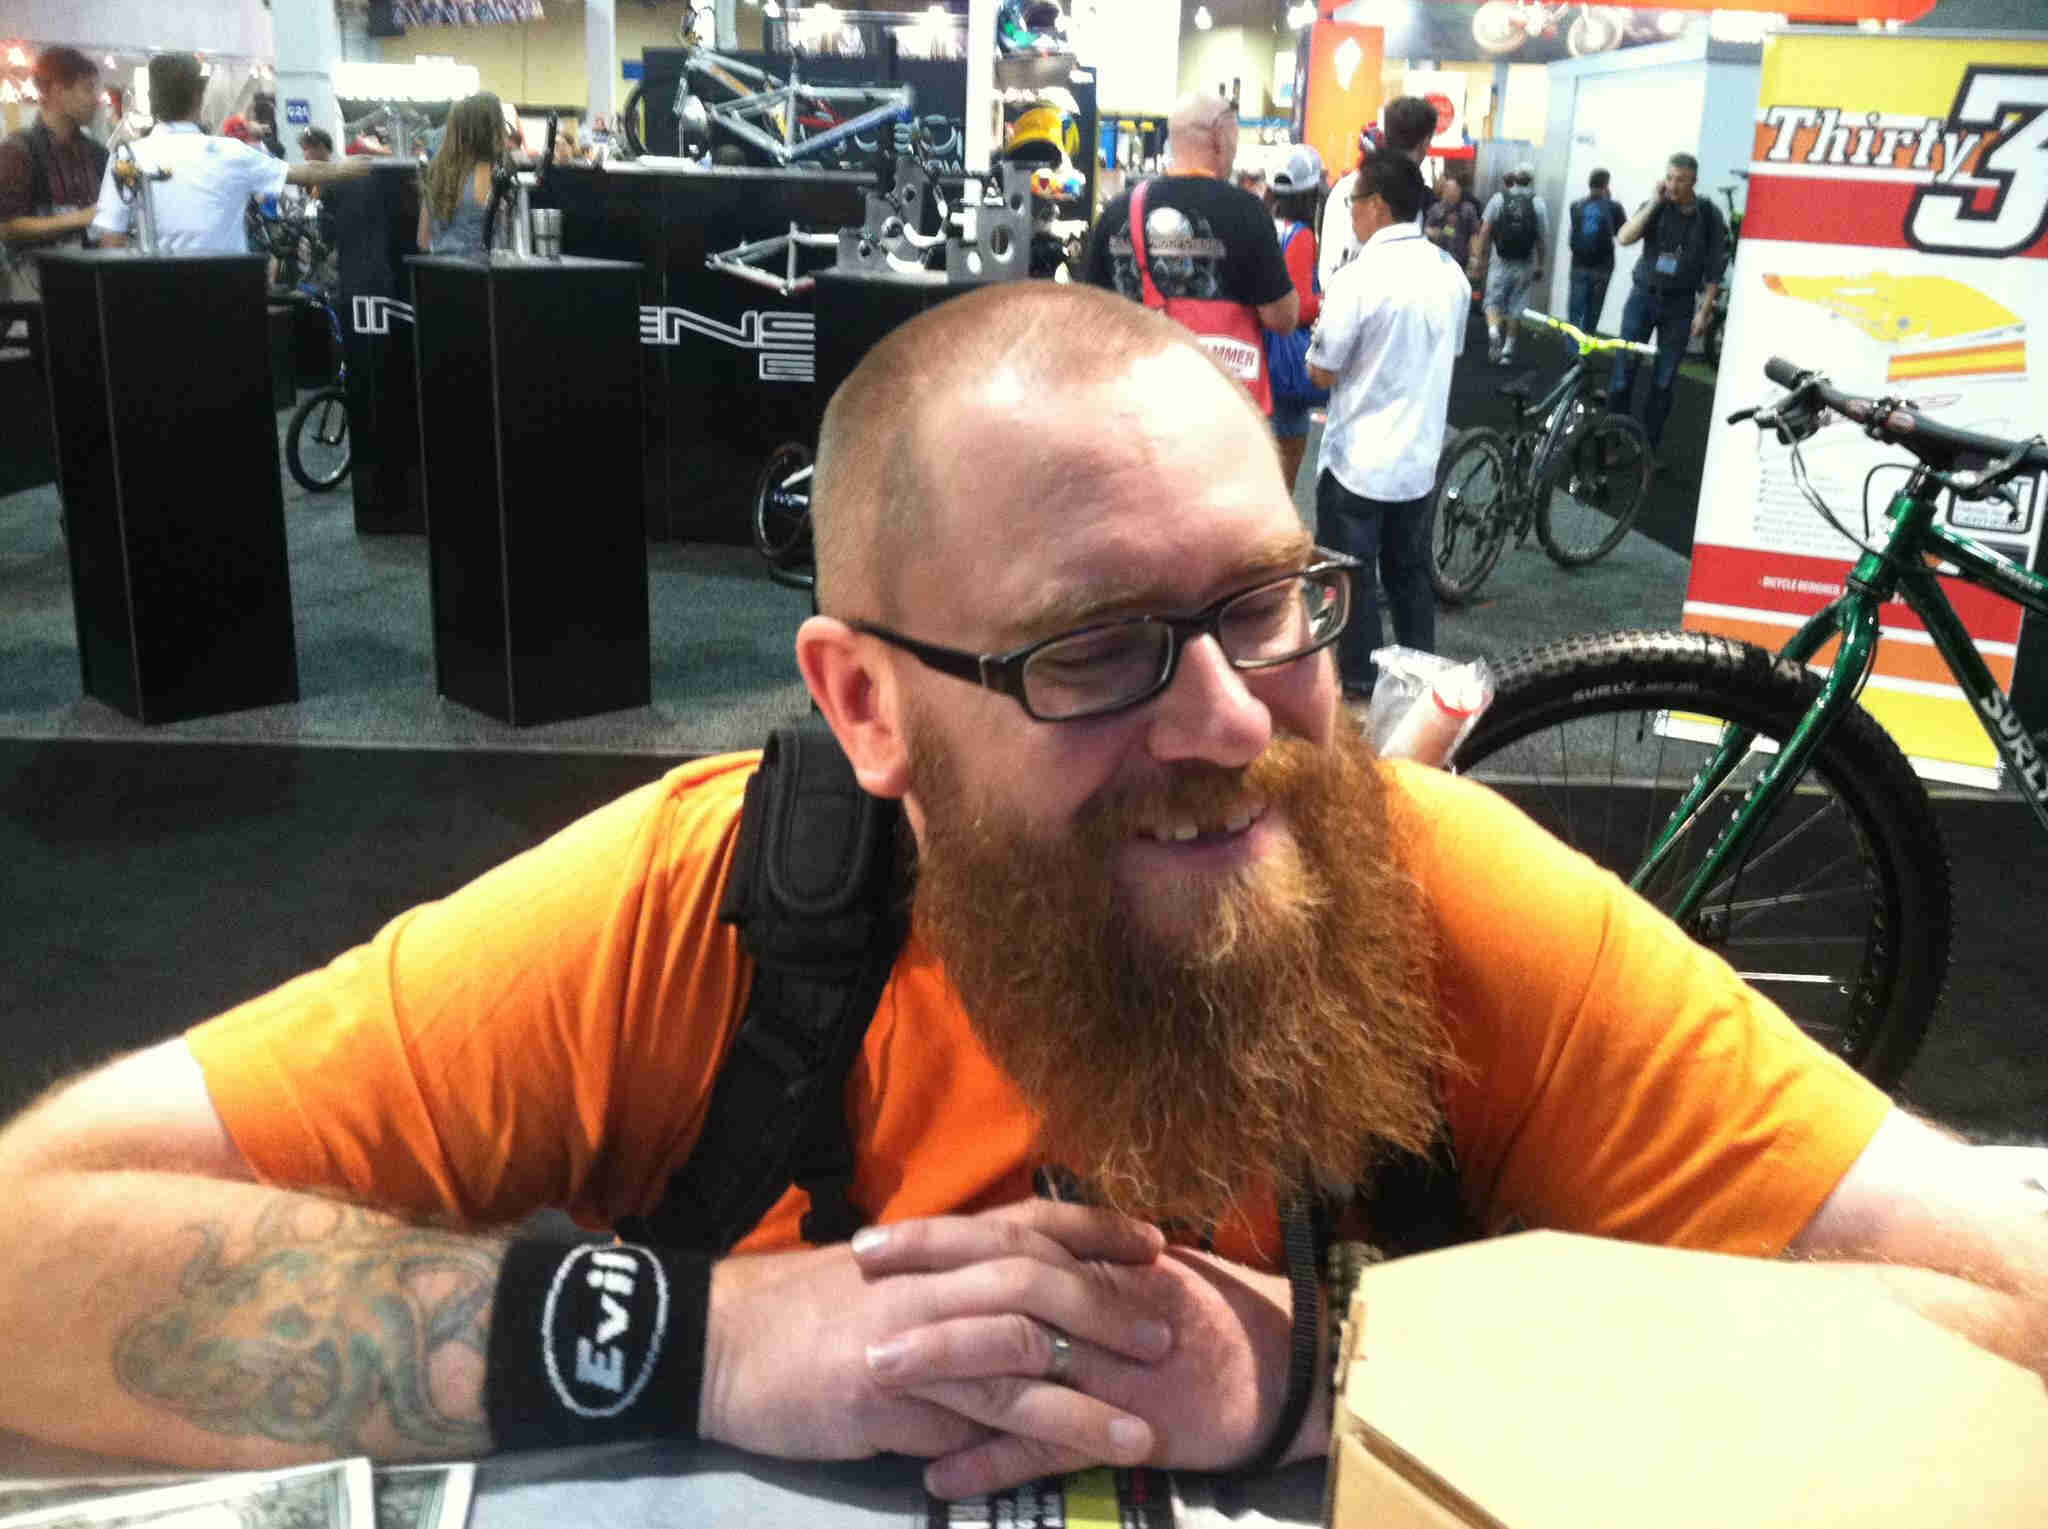 Front, chest up view of a person with a beard, leaning over a table, with tradeshow displays behind him